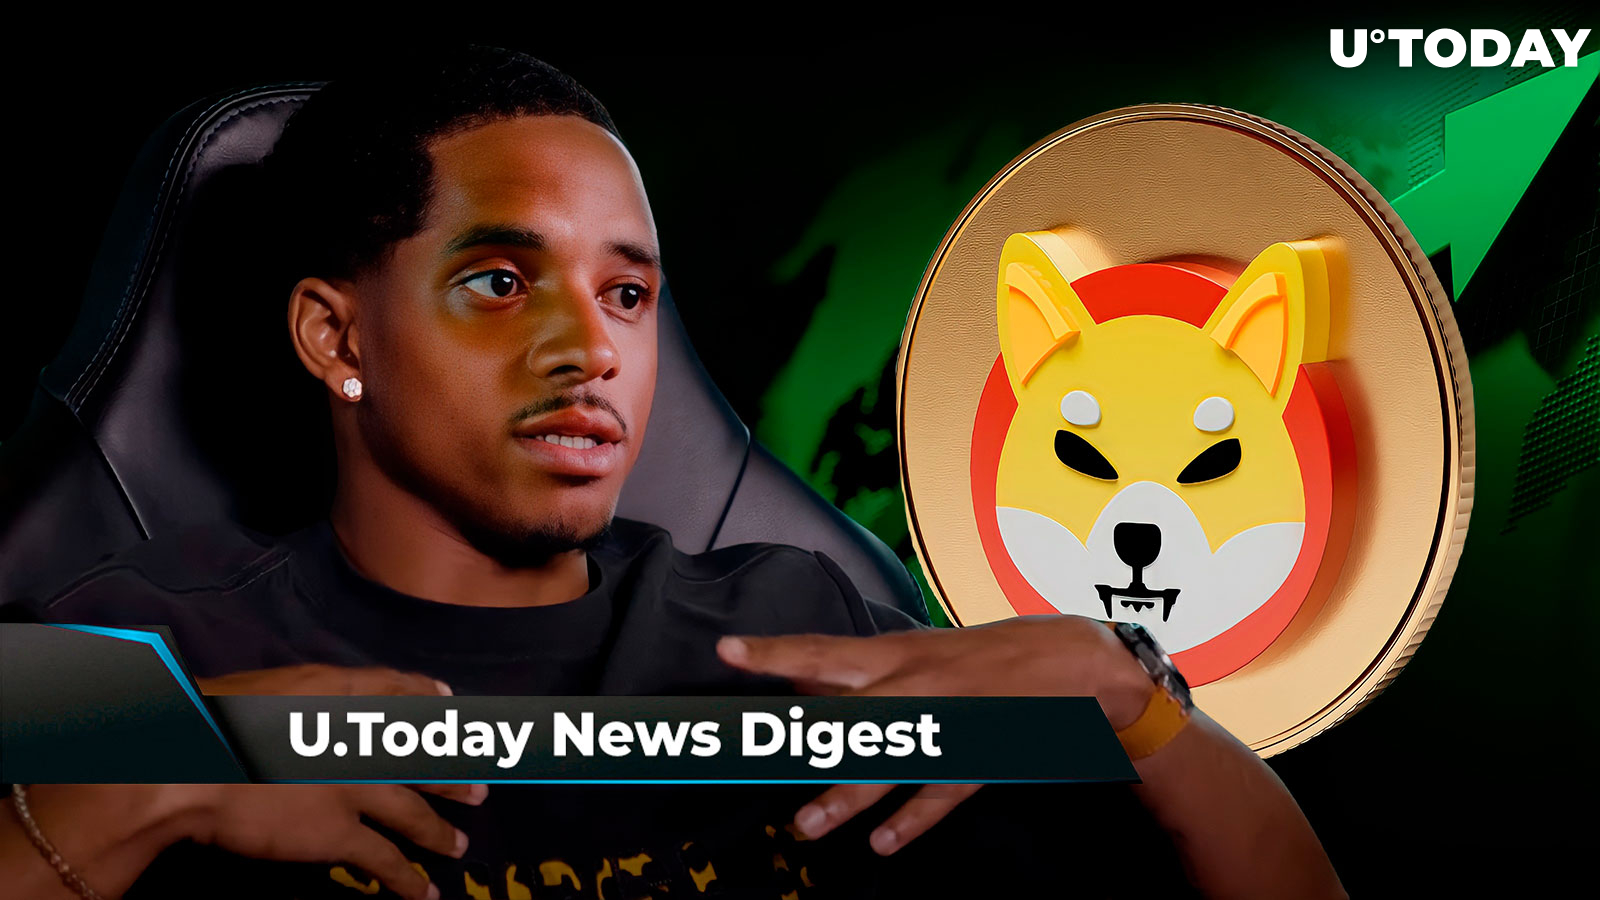 SHIB Inches Toward Massive Breakout, SEC Accuses Ripple of Adopting Inconsistent Arguments, Snoop Dogg’s Son Joins Cardano NFT Project: Crypto News Digest by U.Today